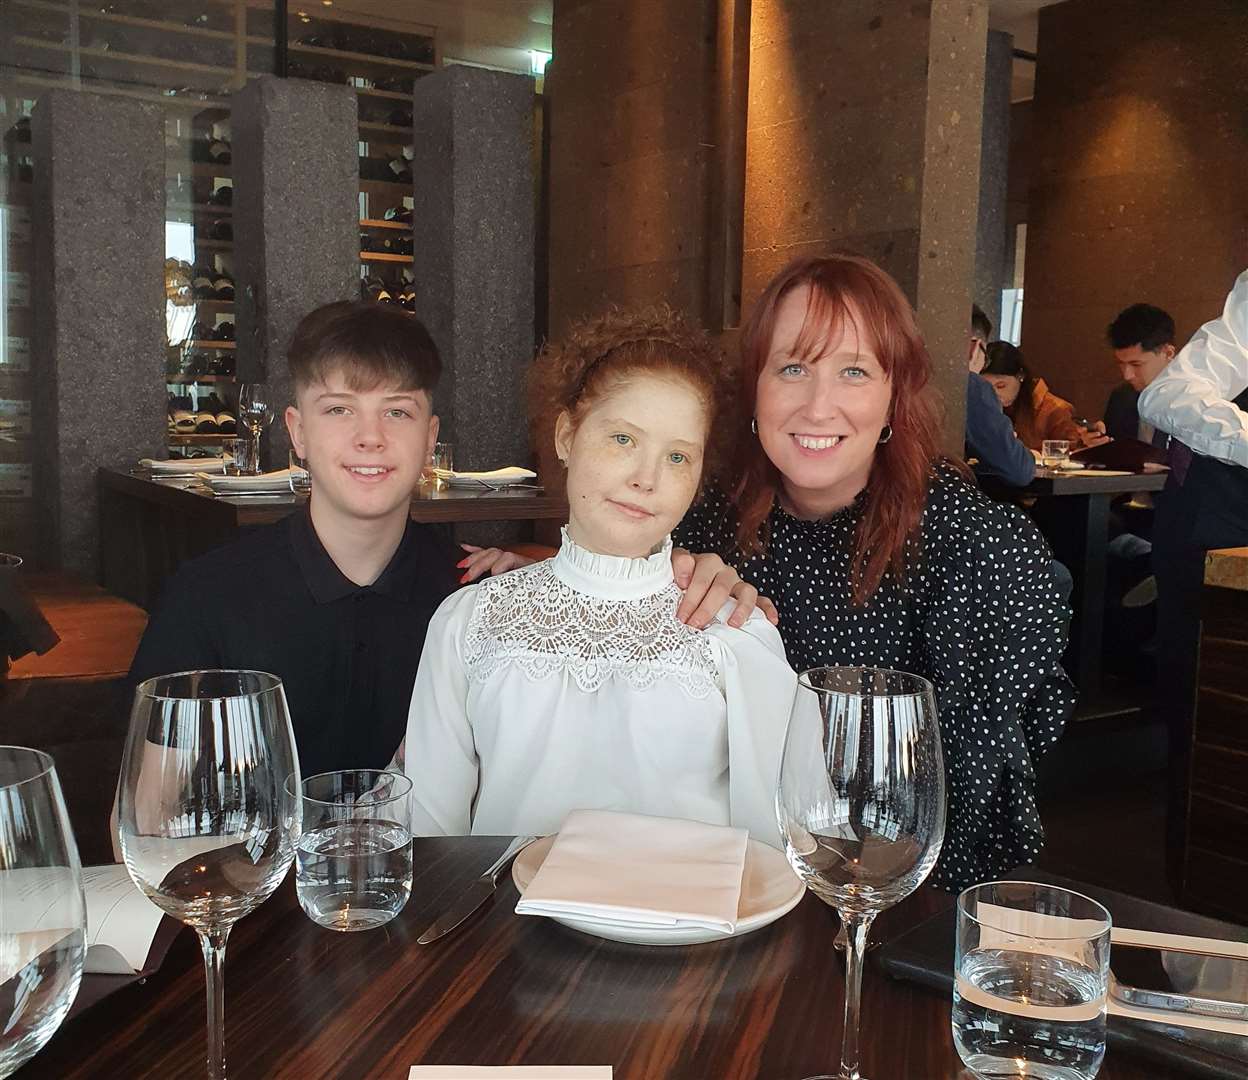 Harry Fraser, Maisie Fraser and Cecilia Smith at the Shard in London.